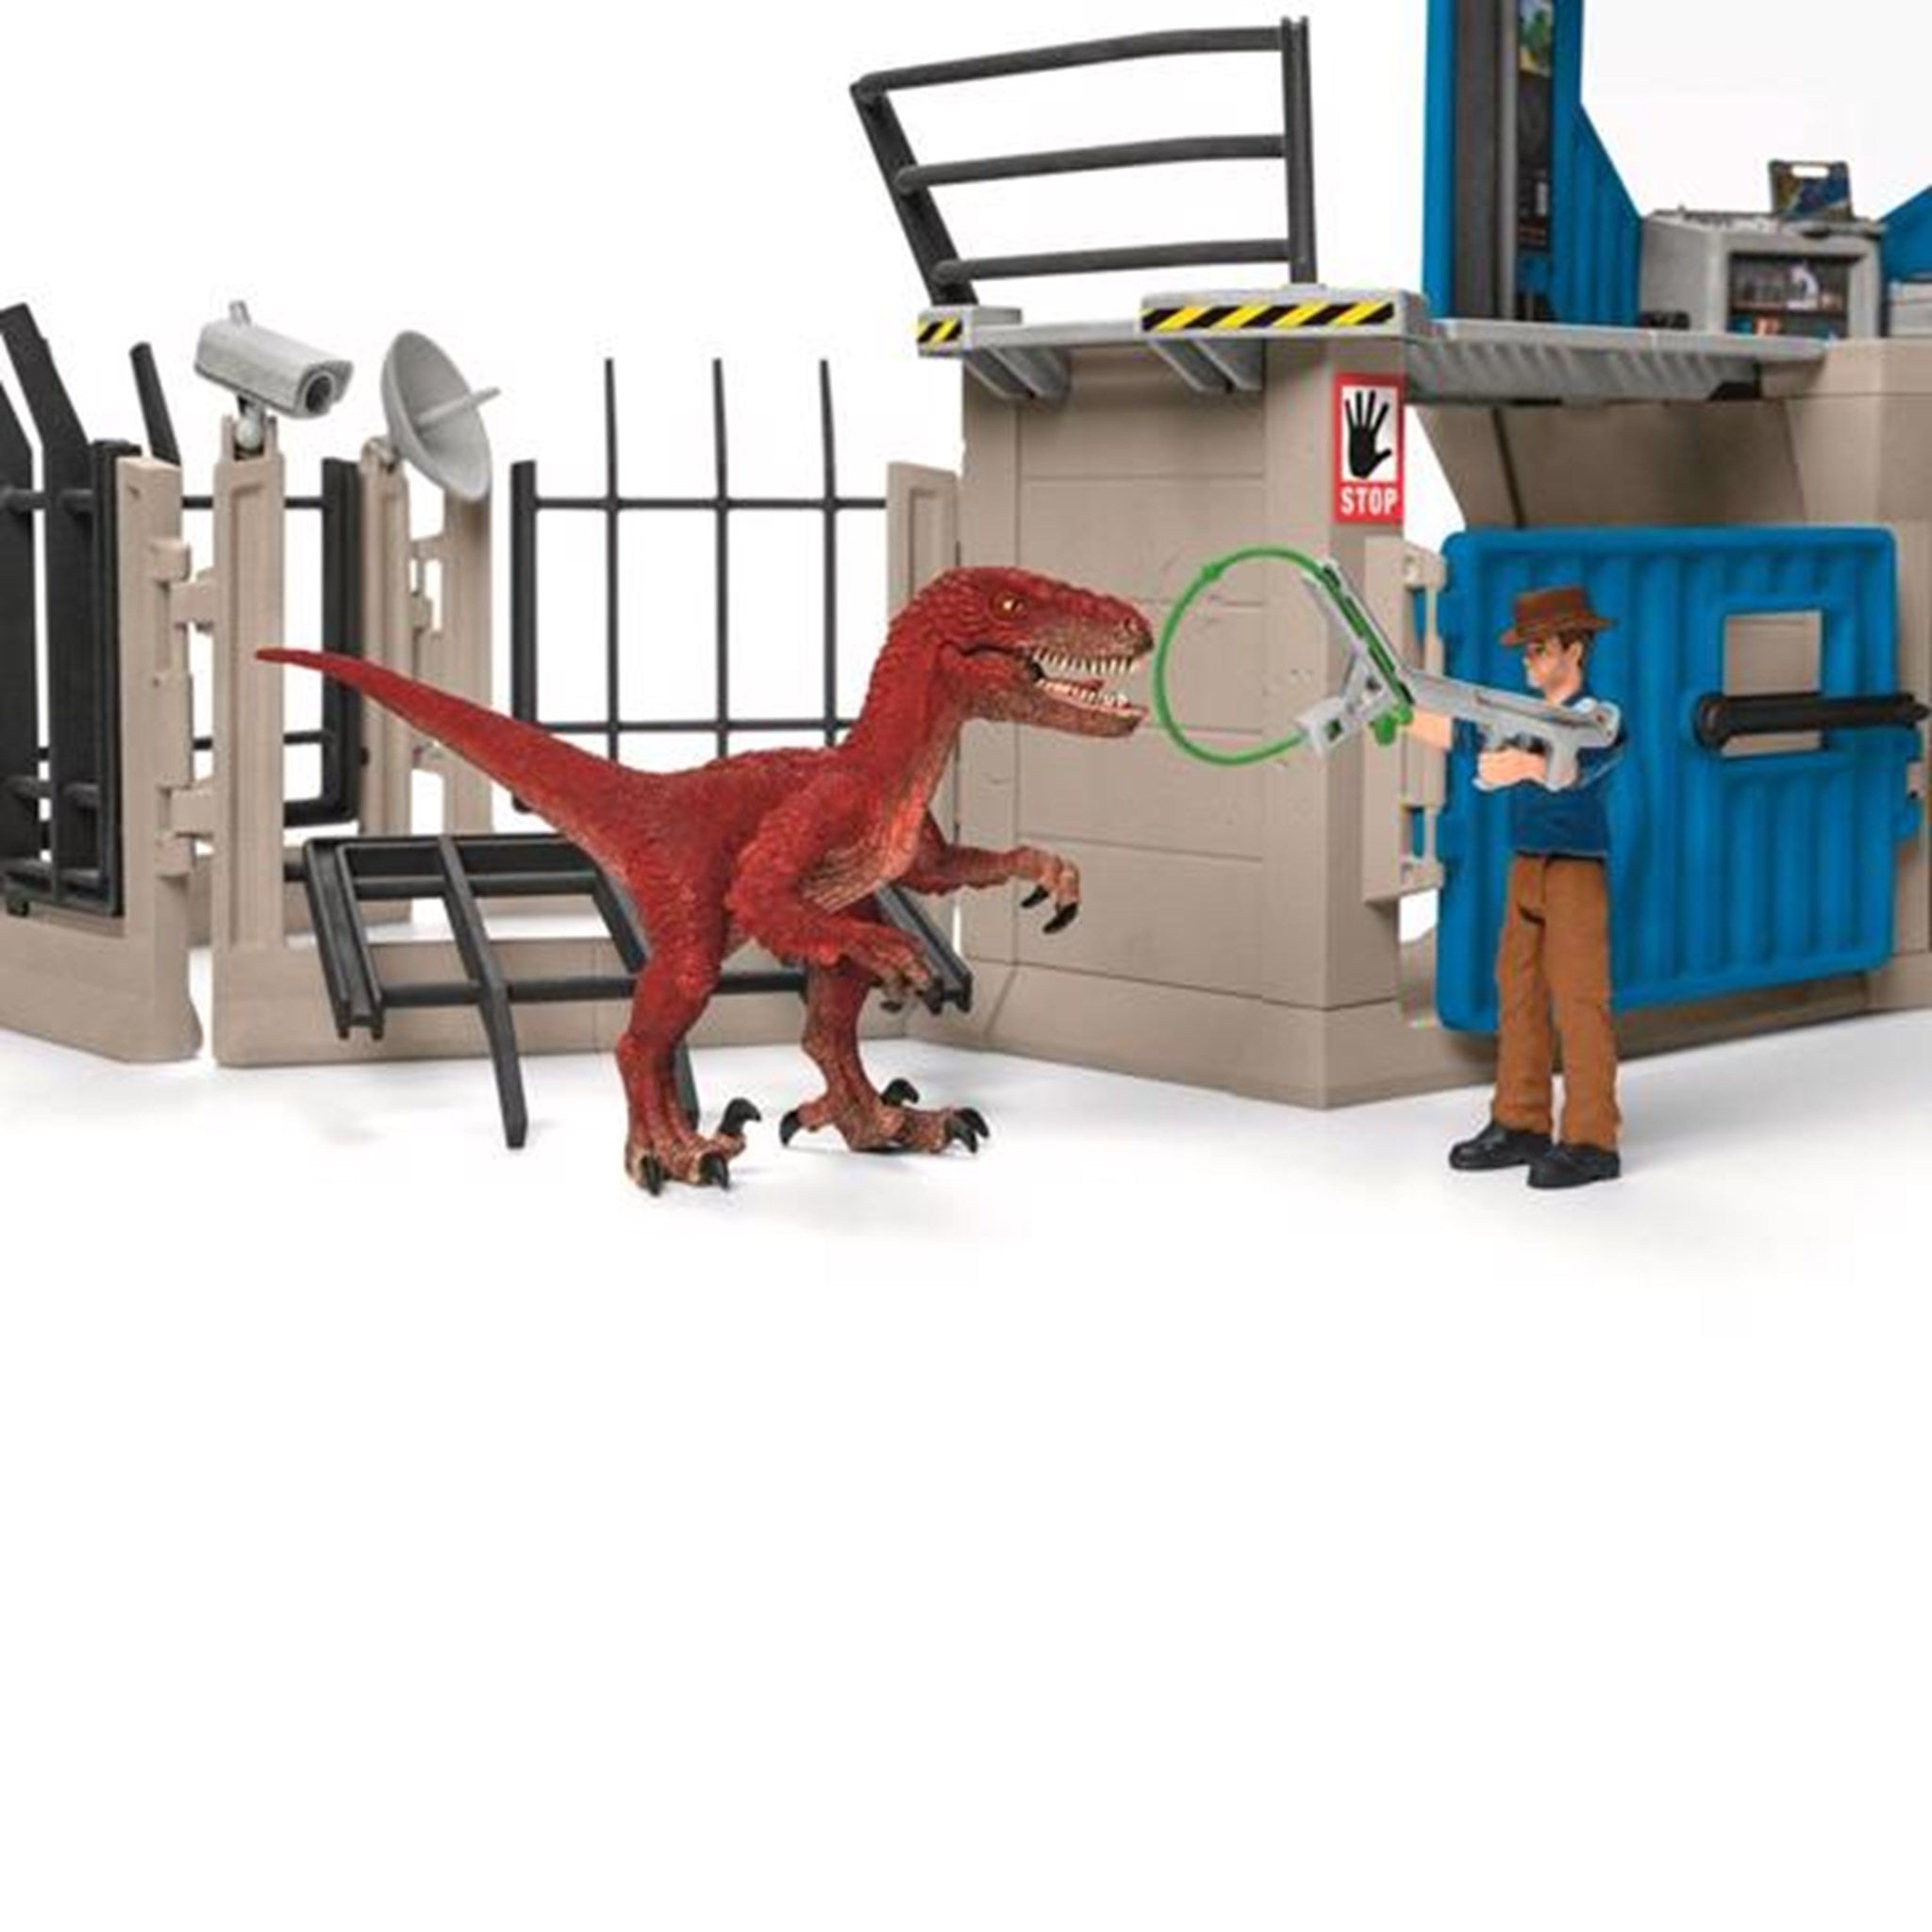 Schleich Dinosaurs Large Dino Research Station 5